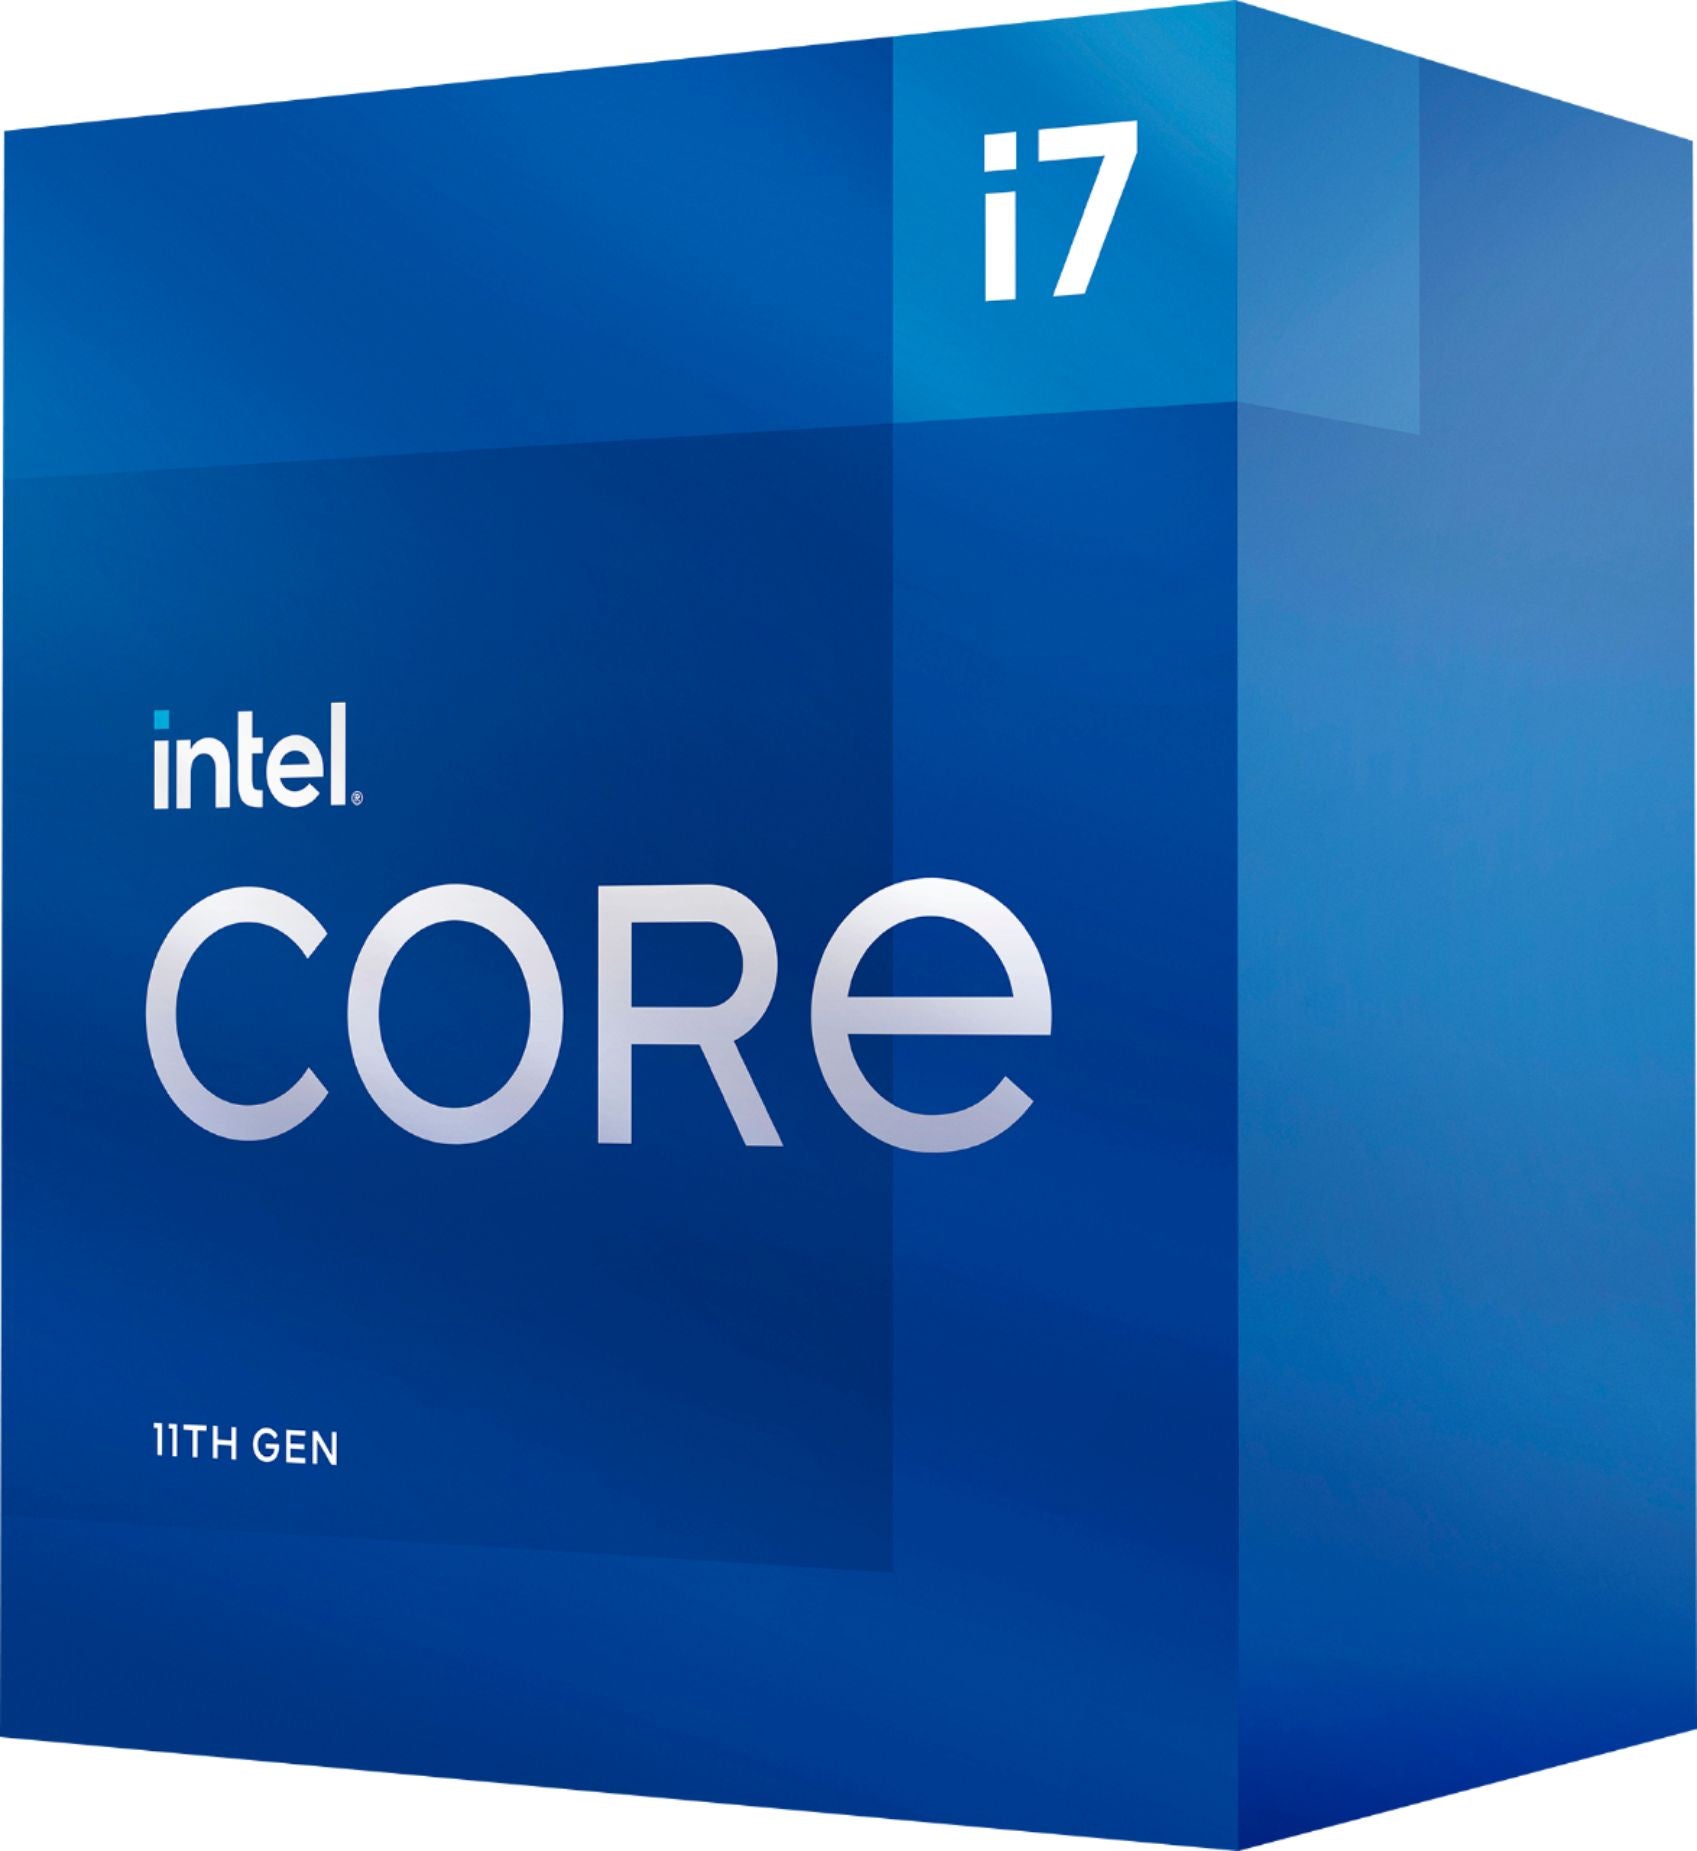 Intel Core i7-11700 2.50GHz up to 4.90GHz Processor